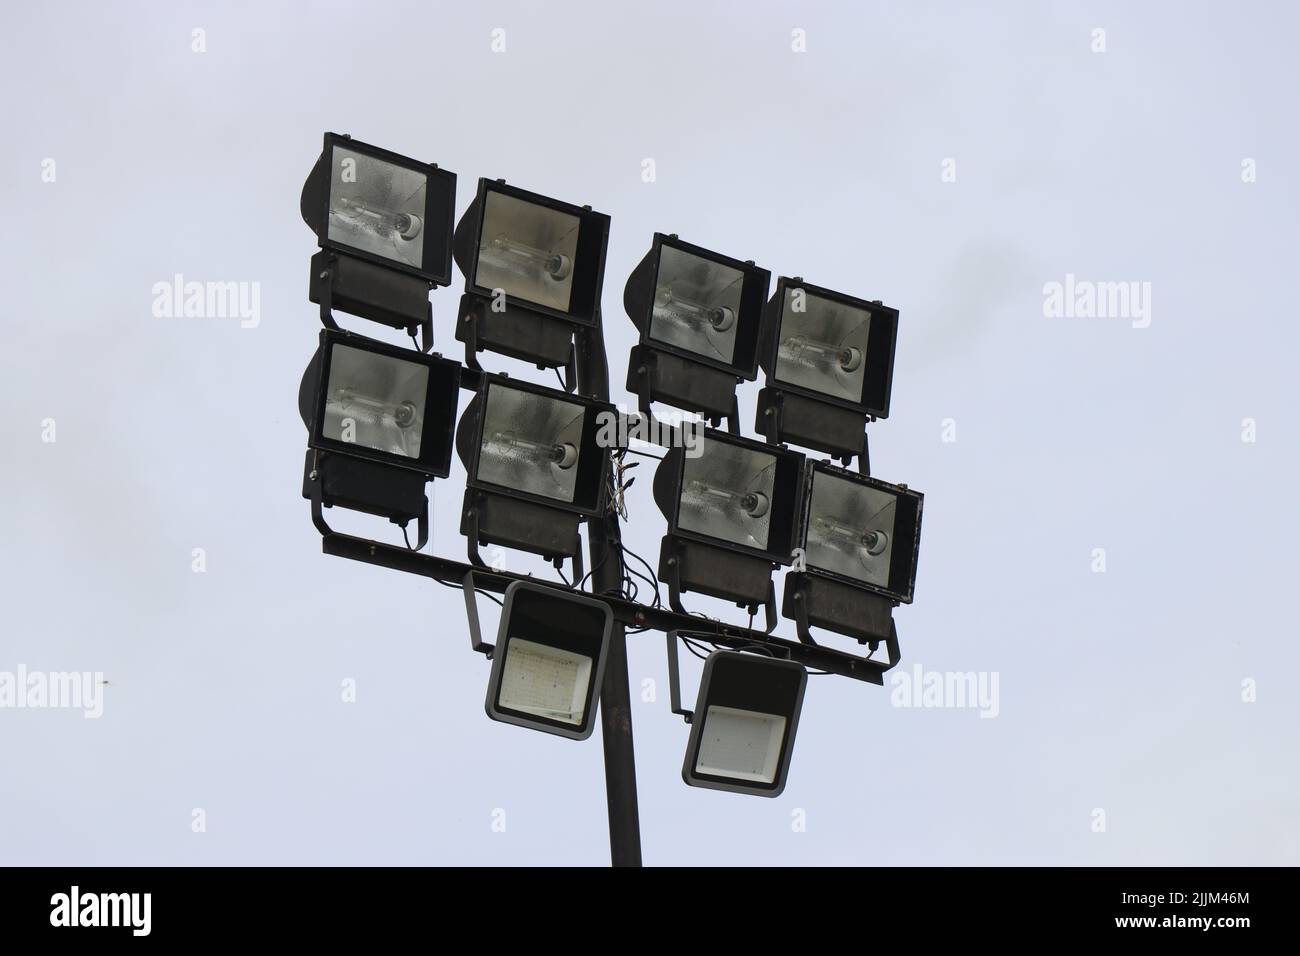 Stadium lights with many powerful halogen and LED bulb lamps attached to a tower that gives out light to the ground during the dark Stock Photo